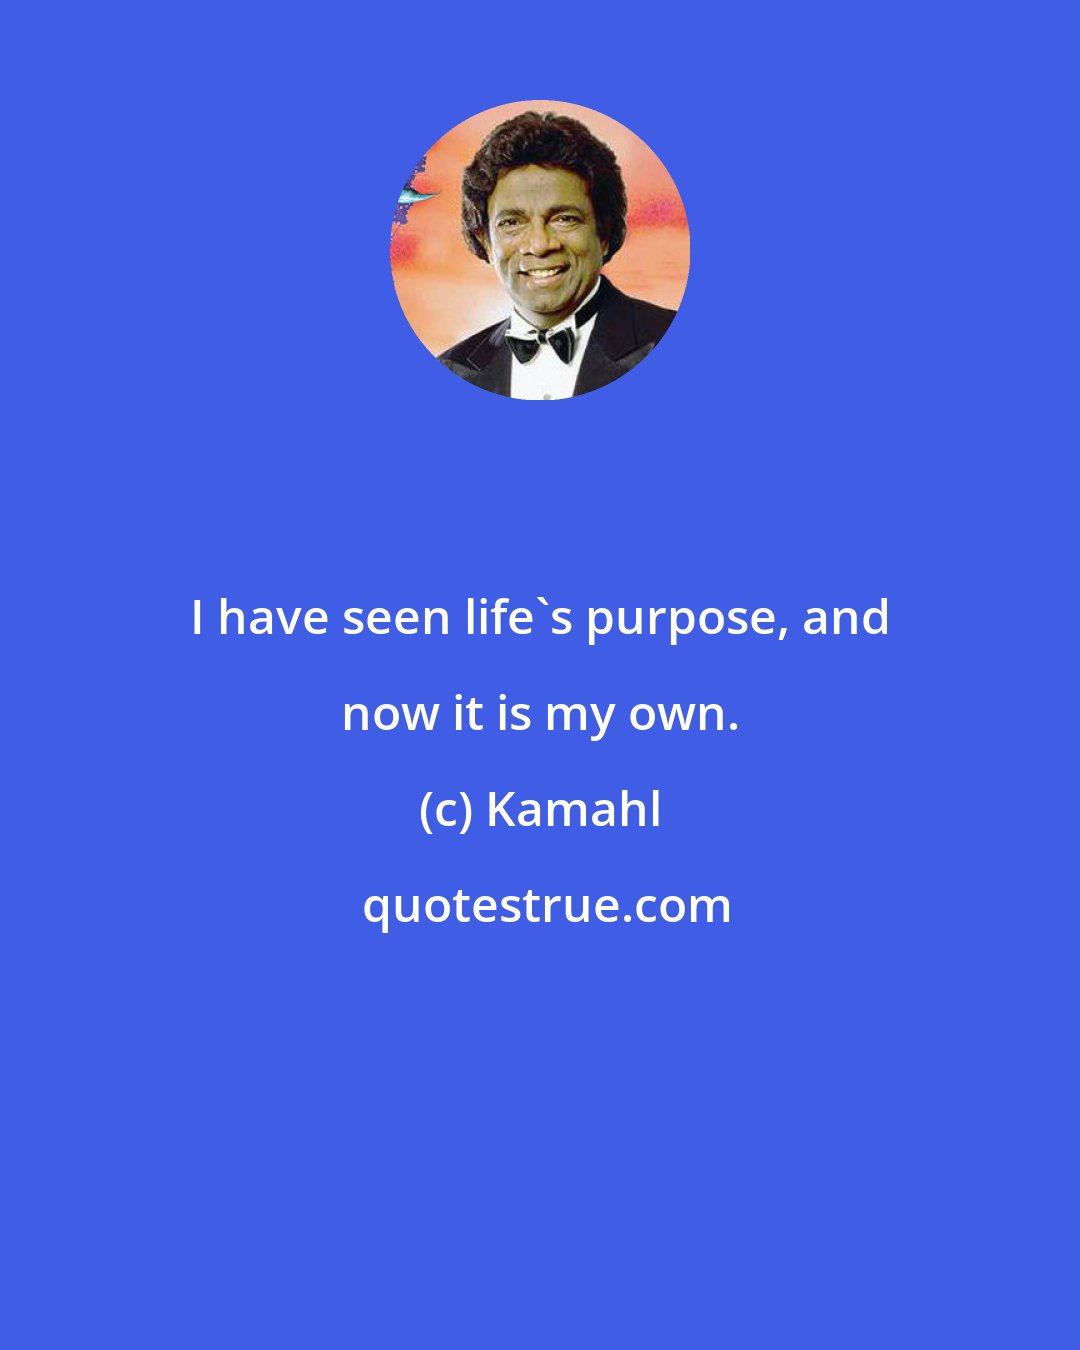 Kamahl: I have seen life's purpose, and now it is my own.